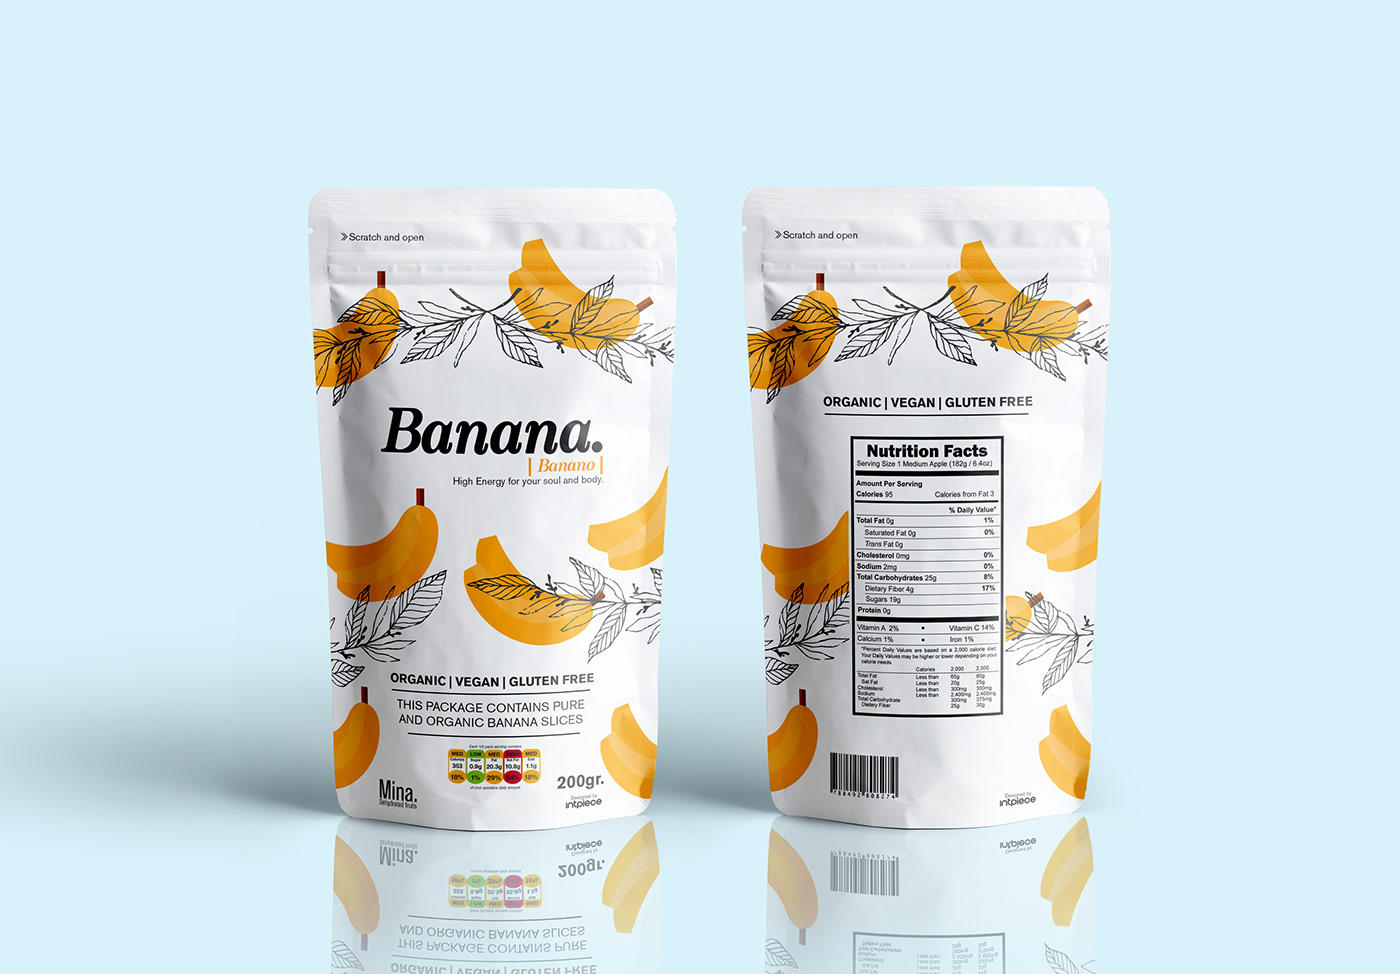 Packaging fruits brand Mina dehydrated Intpiece design product graphic jar